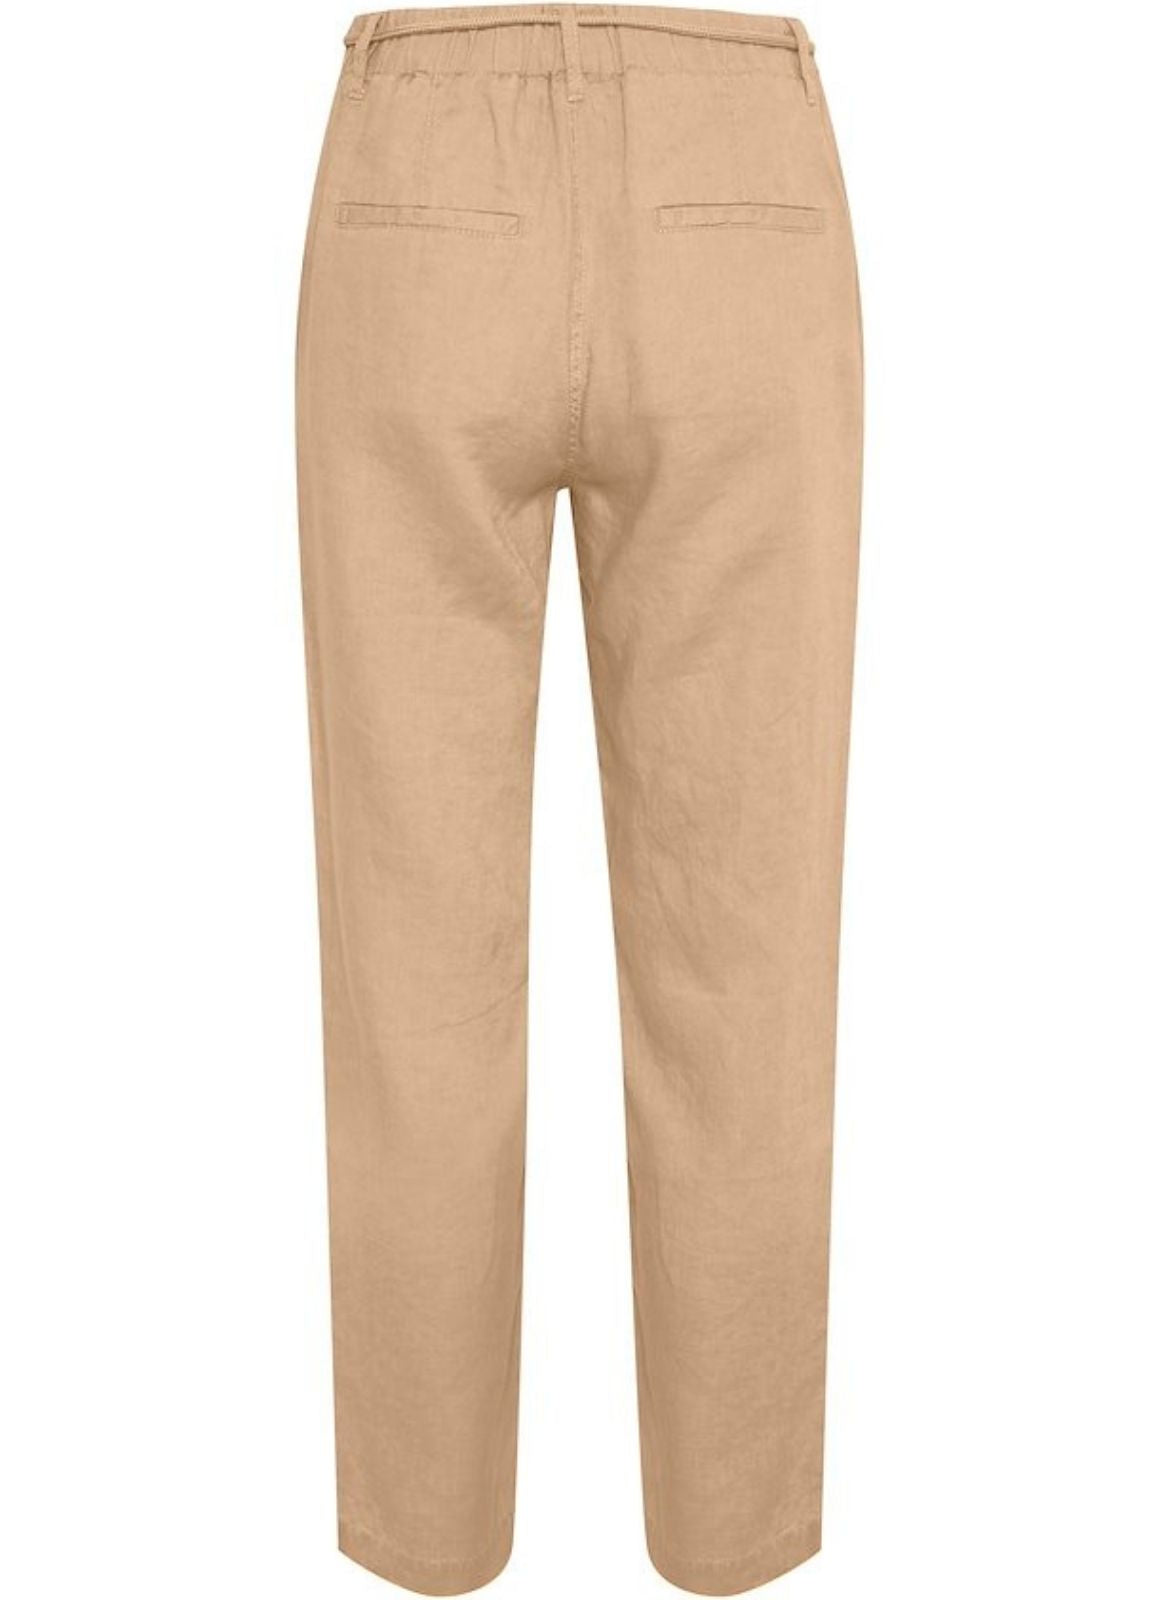 Part Two - Harena Casual Pant